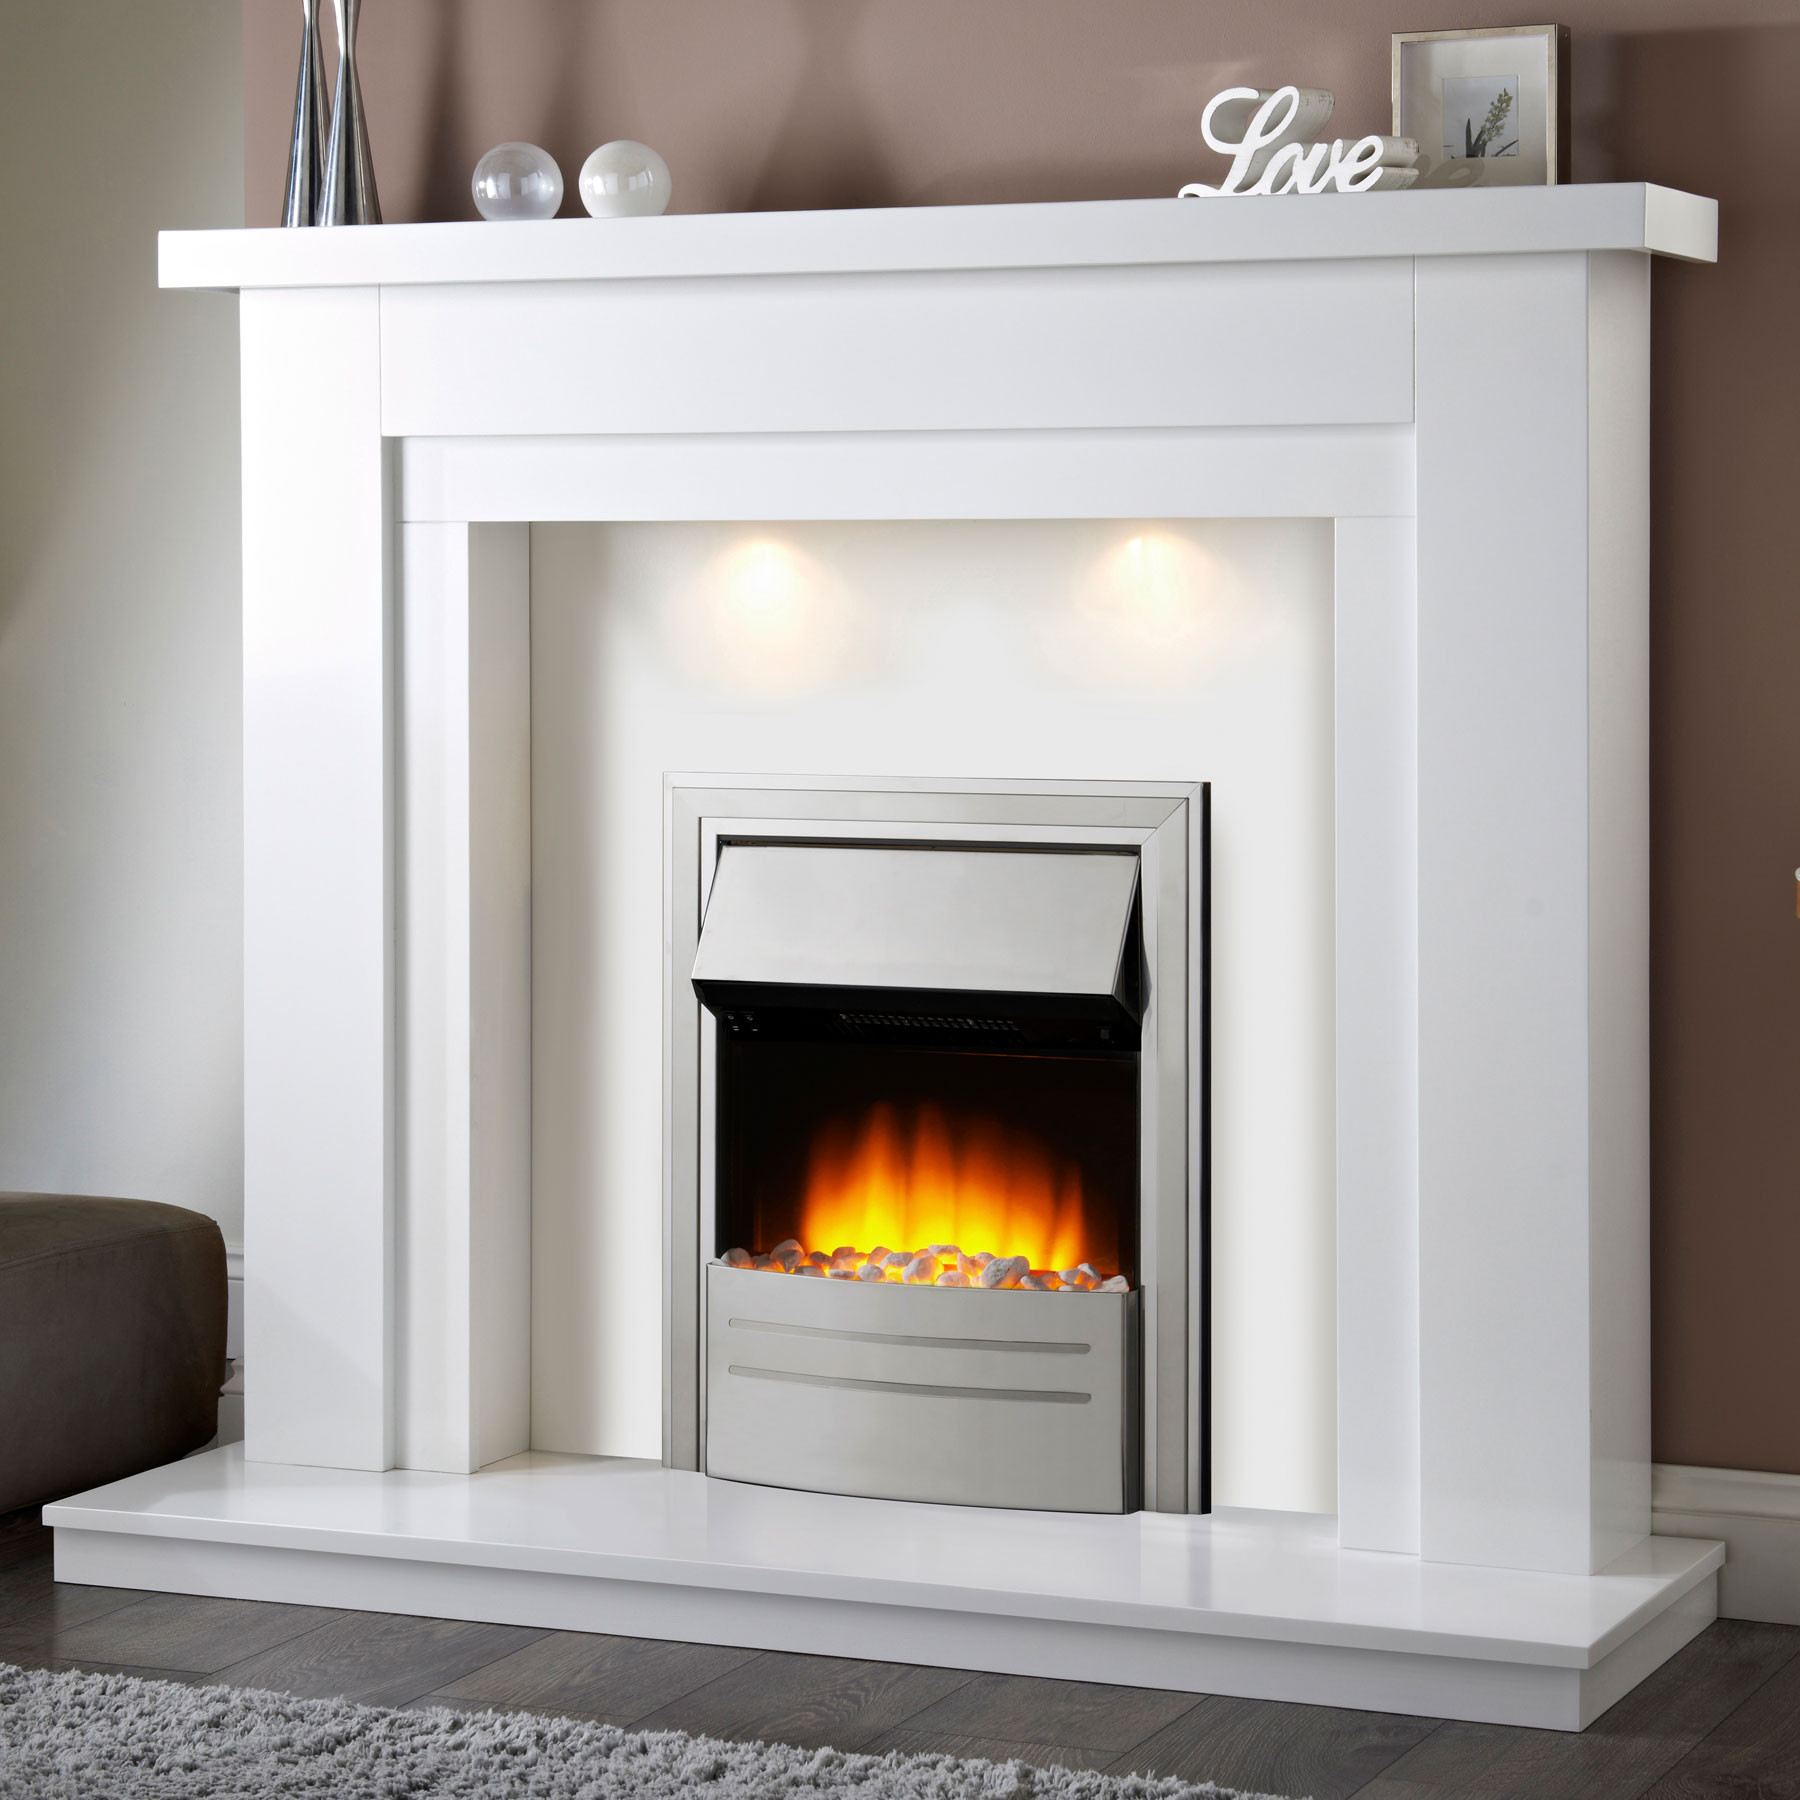 Monessen Fireplace Parts Unique White Fireplace Electric Charming Fireplace